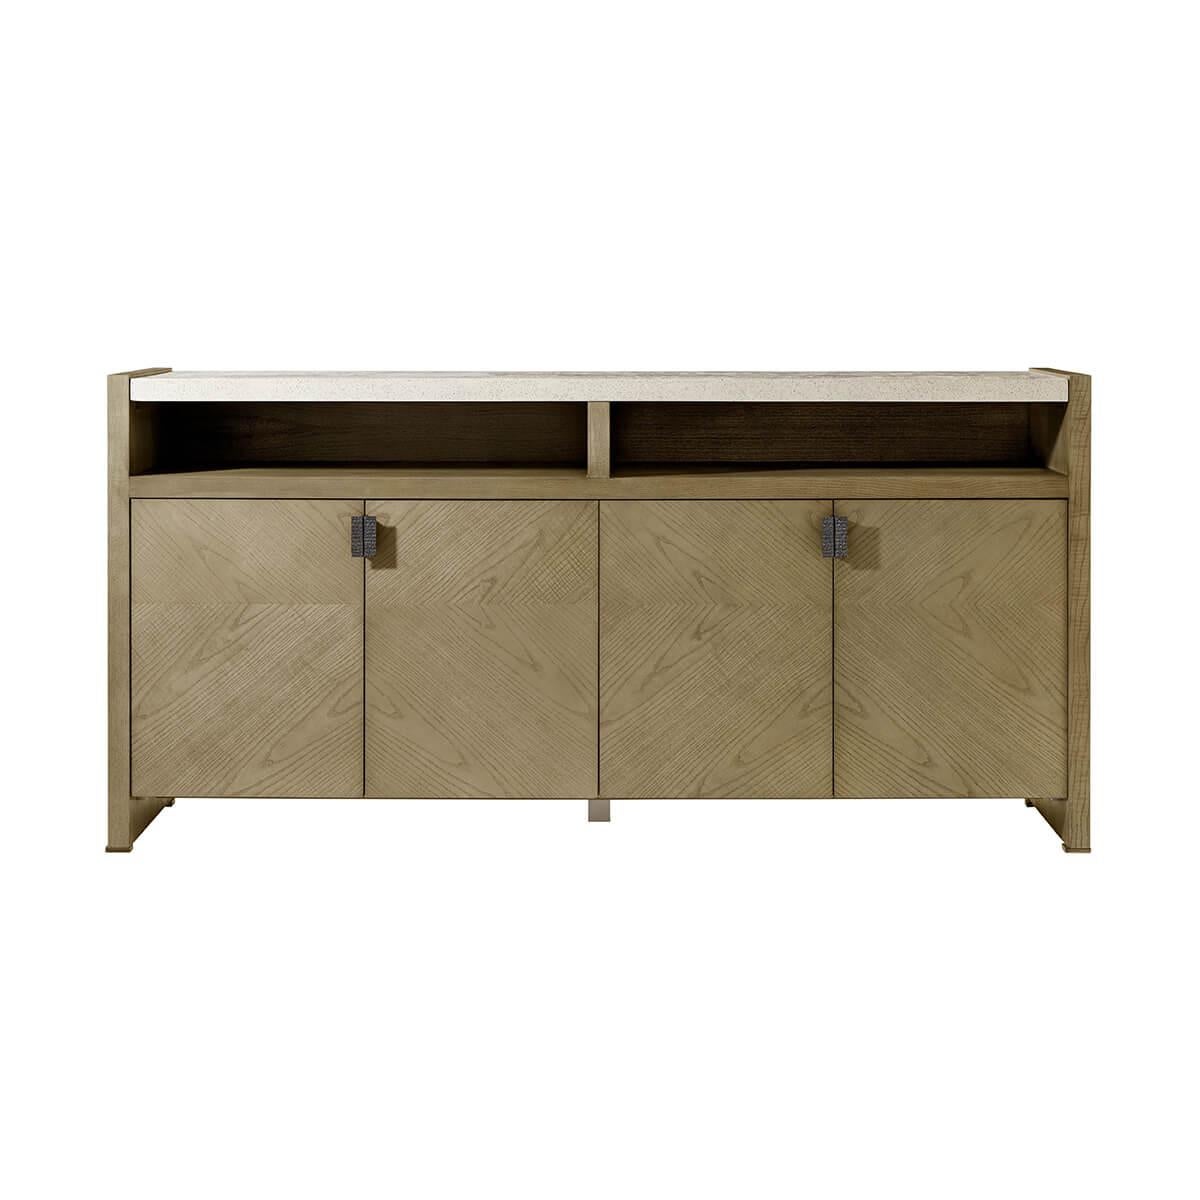 a minimalist four-door sideboard with peaceful symmetry in figured cathedral ash in our light Dune finish, with metal pulls in Ember completed with a top done in our stone-like porous Mineral finish. 
With two open shelves and two adjustable shelves